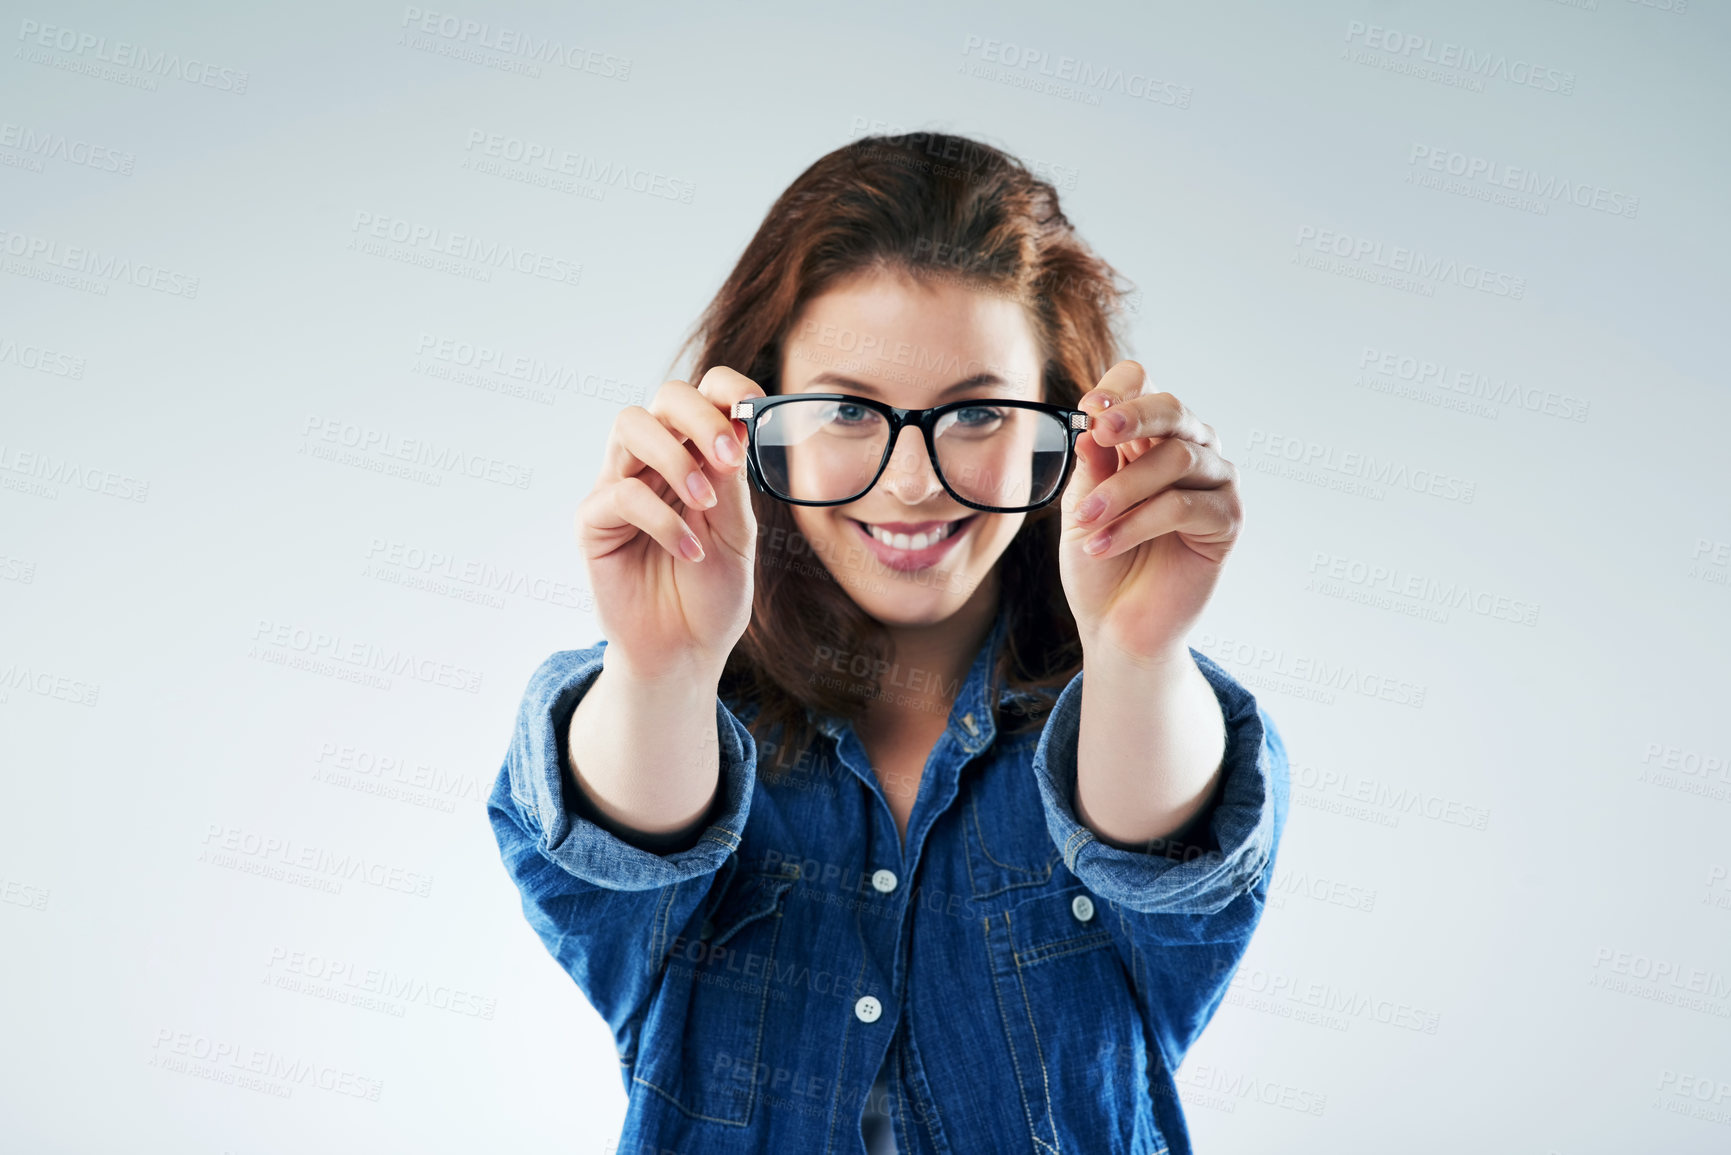 Buy stock photo Studio portrait of a young woman holding a pair of spectacles against a grey background